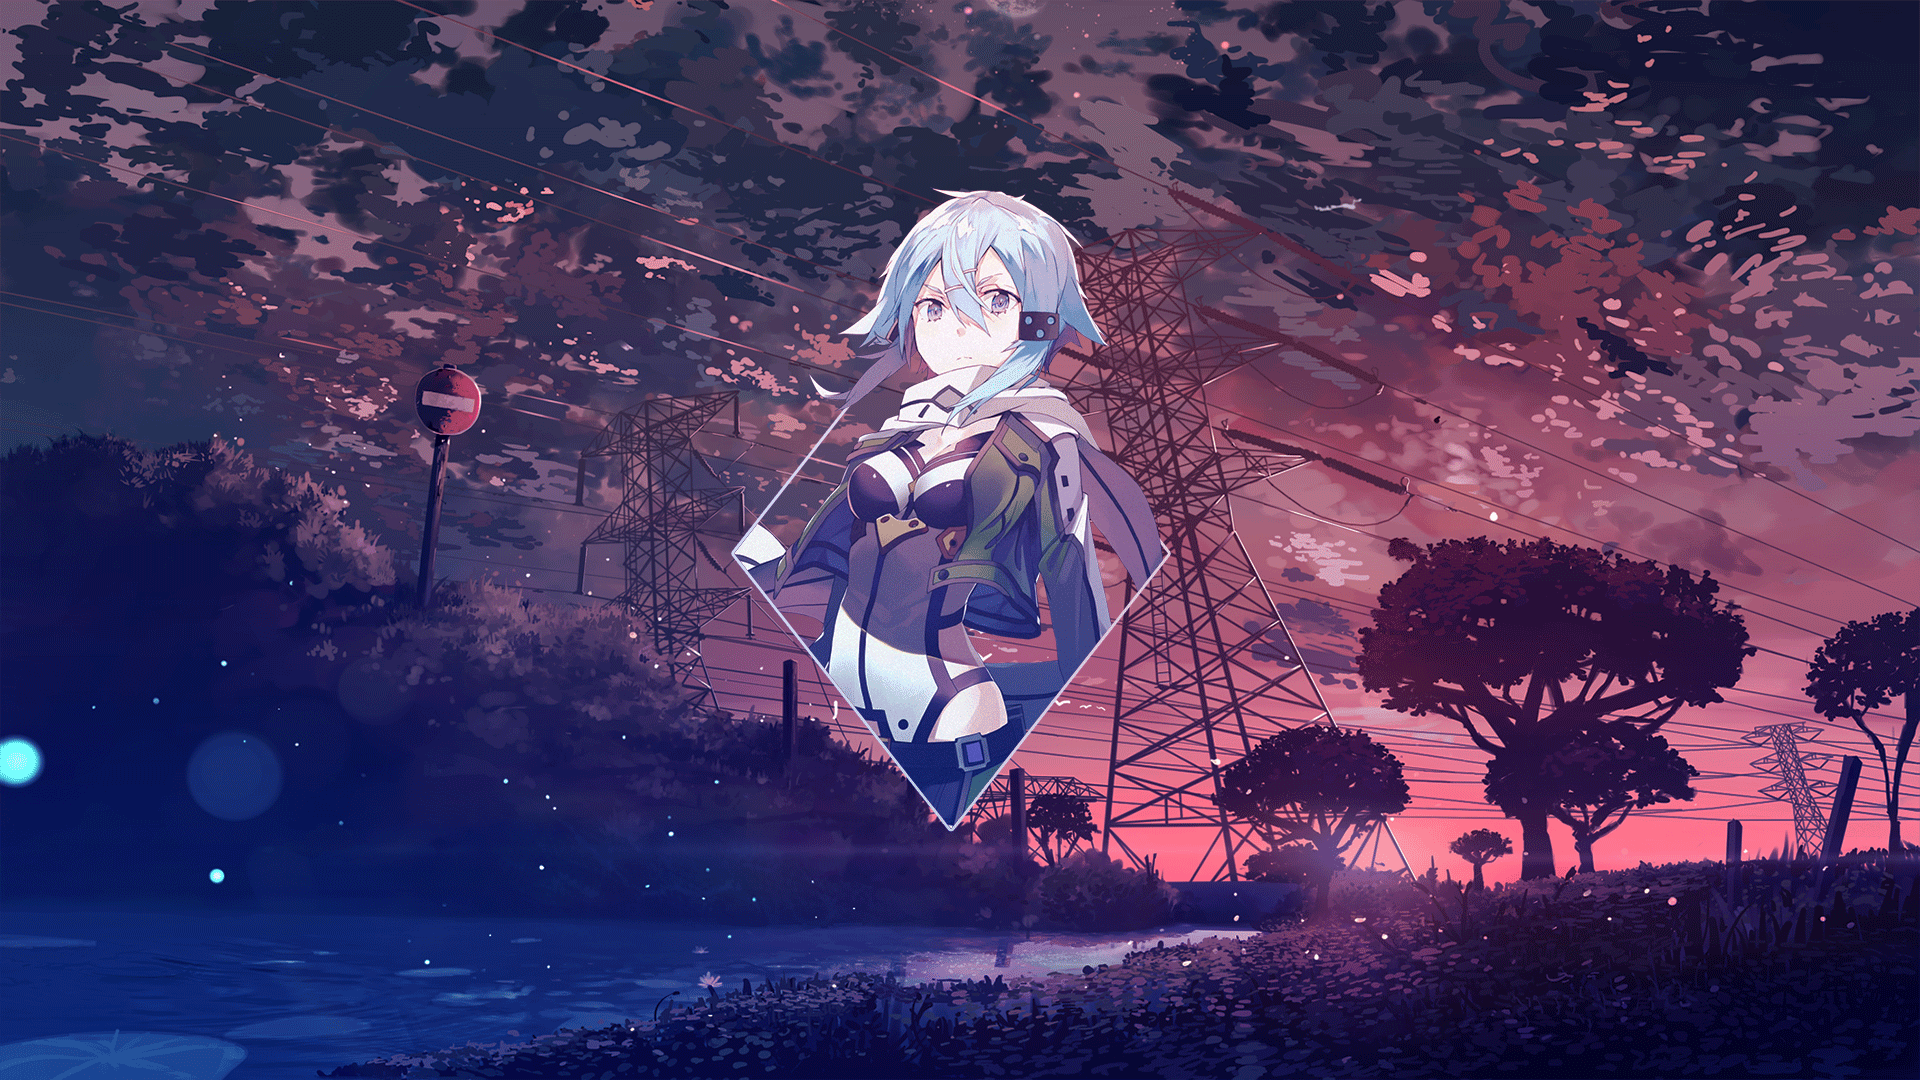 Shinon Sword Art Online Sword Art Online Sword Art Online Fatal Bullet Anime Anime Girls Picture In  1920x1080